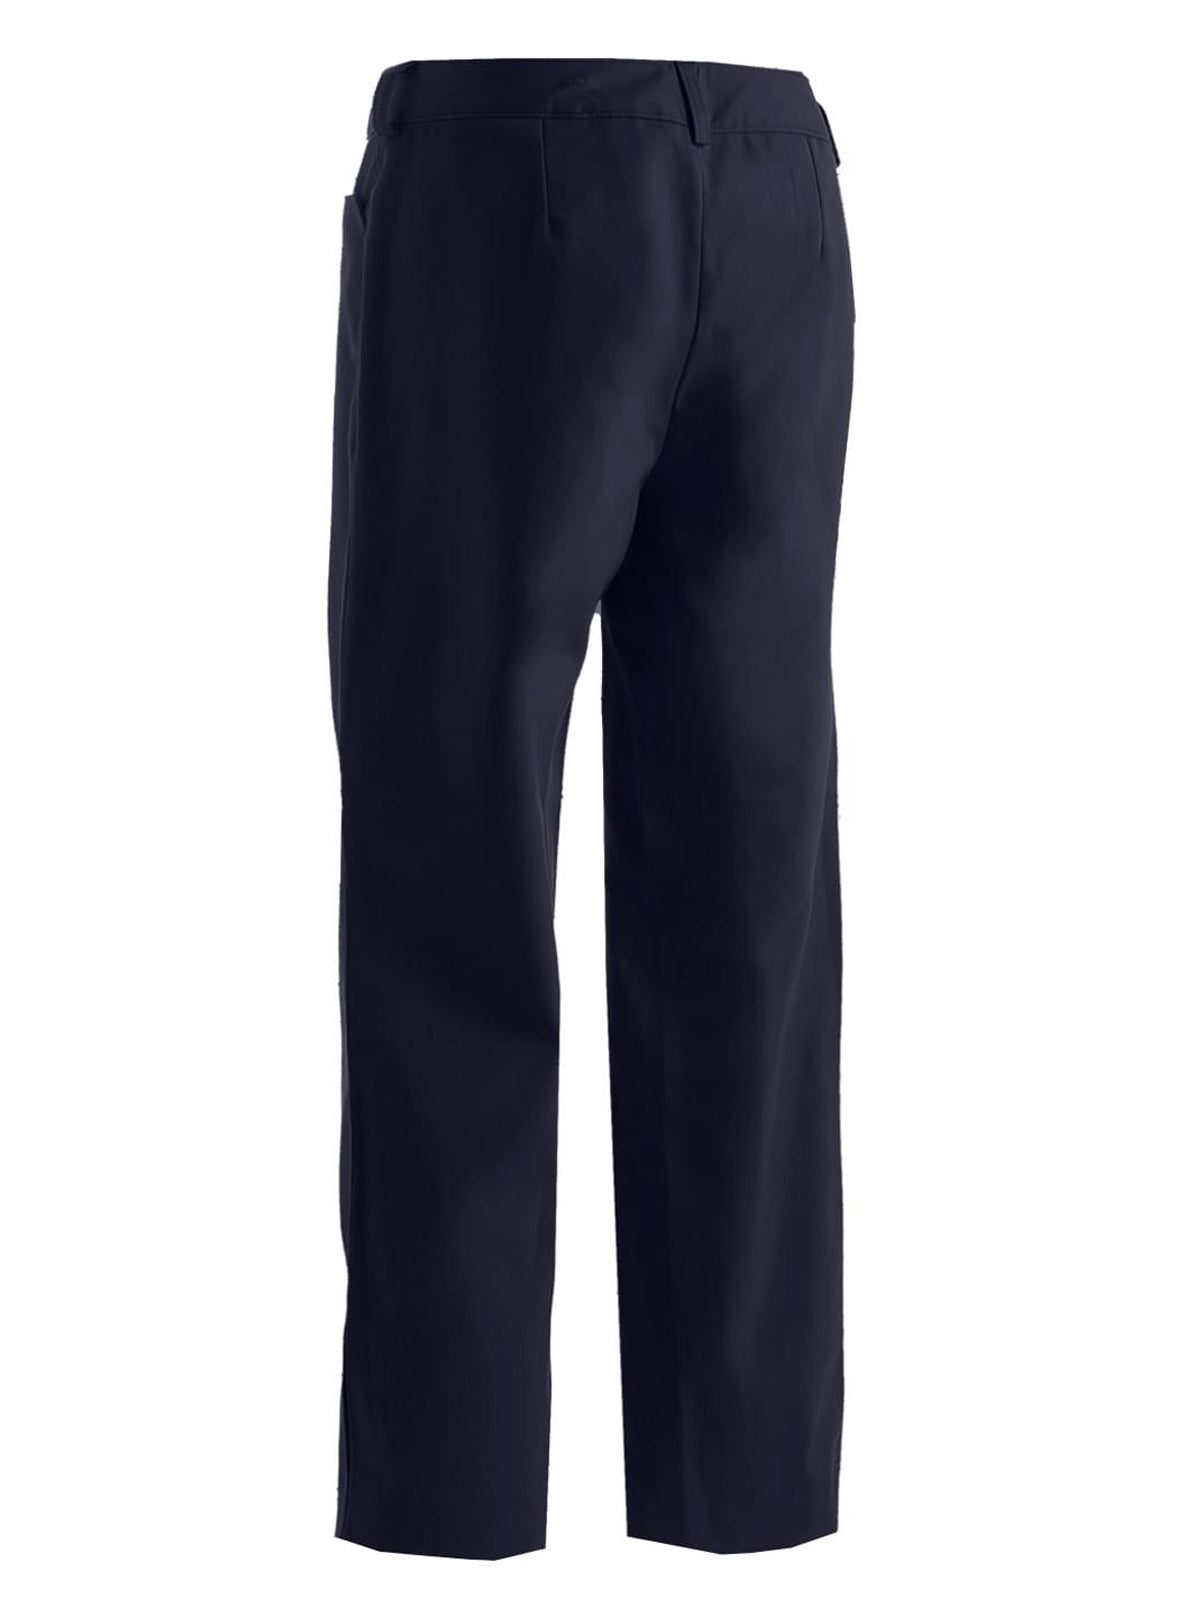 Women's Mid-Rise Rugged Pant